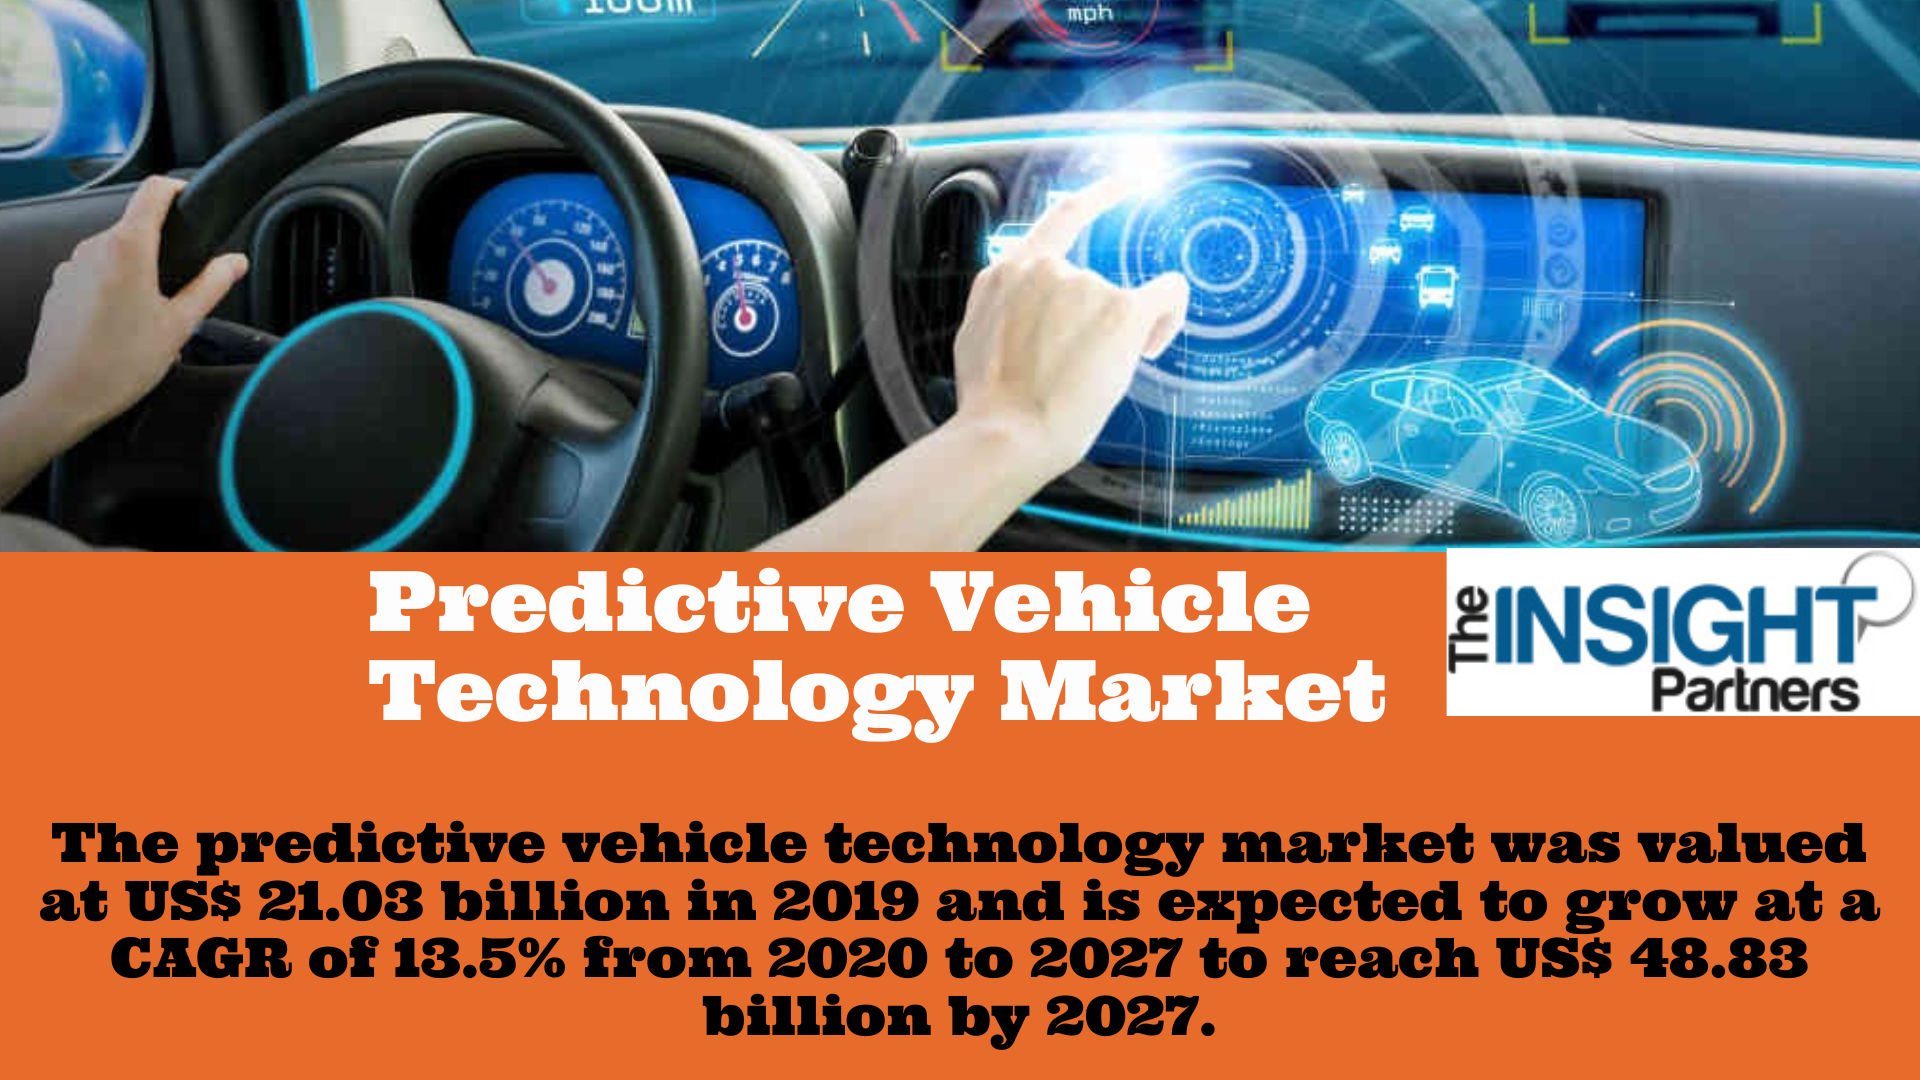 Predictive Vehicle Technology Market Forecast Business Opportunities and Growth Challenges Report